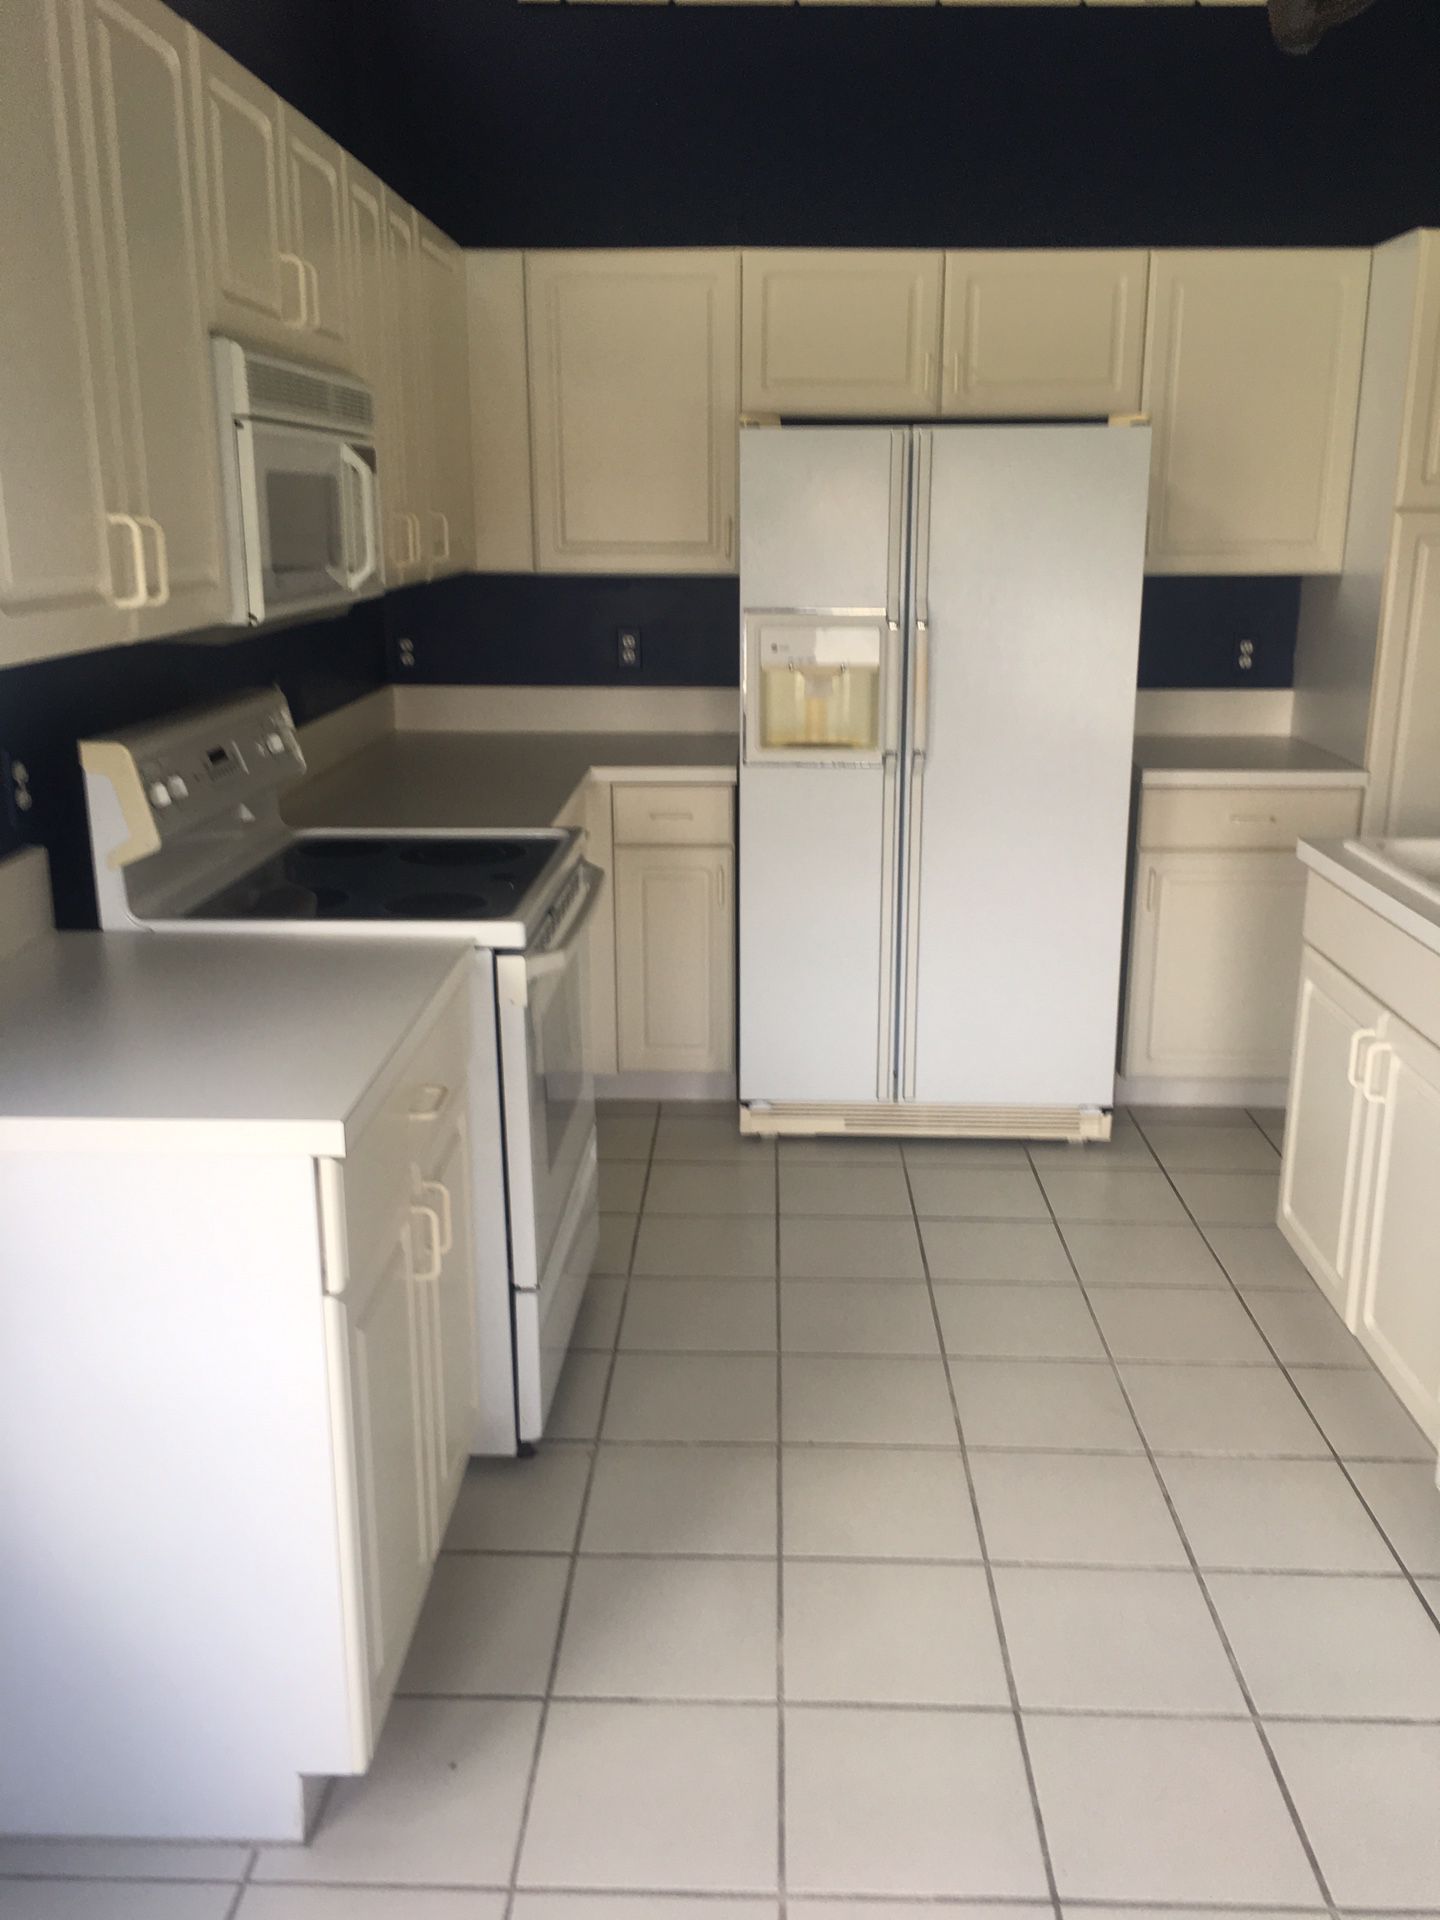 Refrigerator dishwasher stove and cabinets